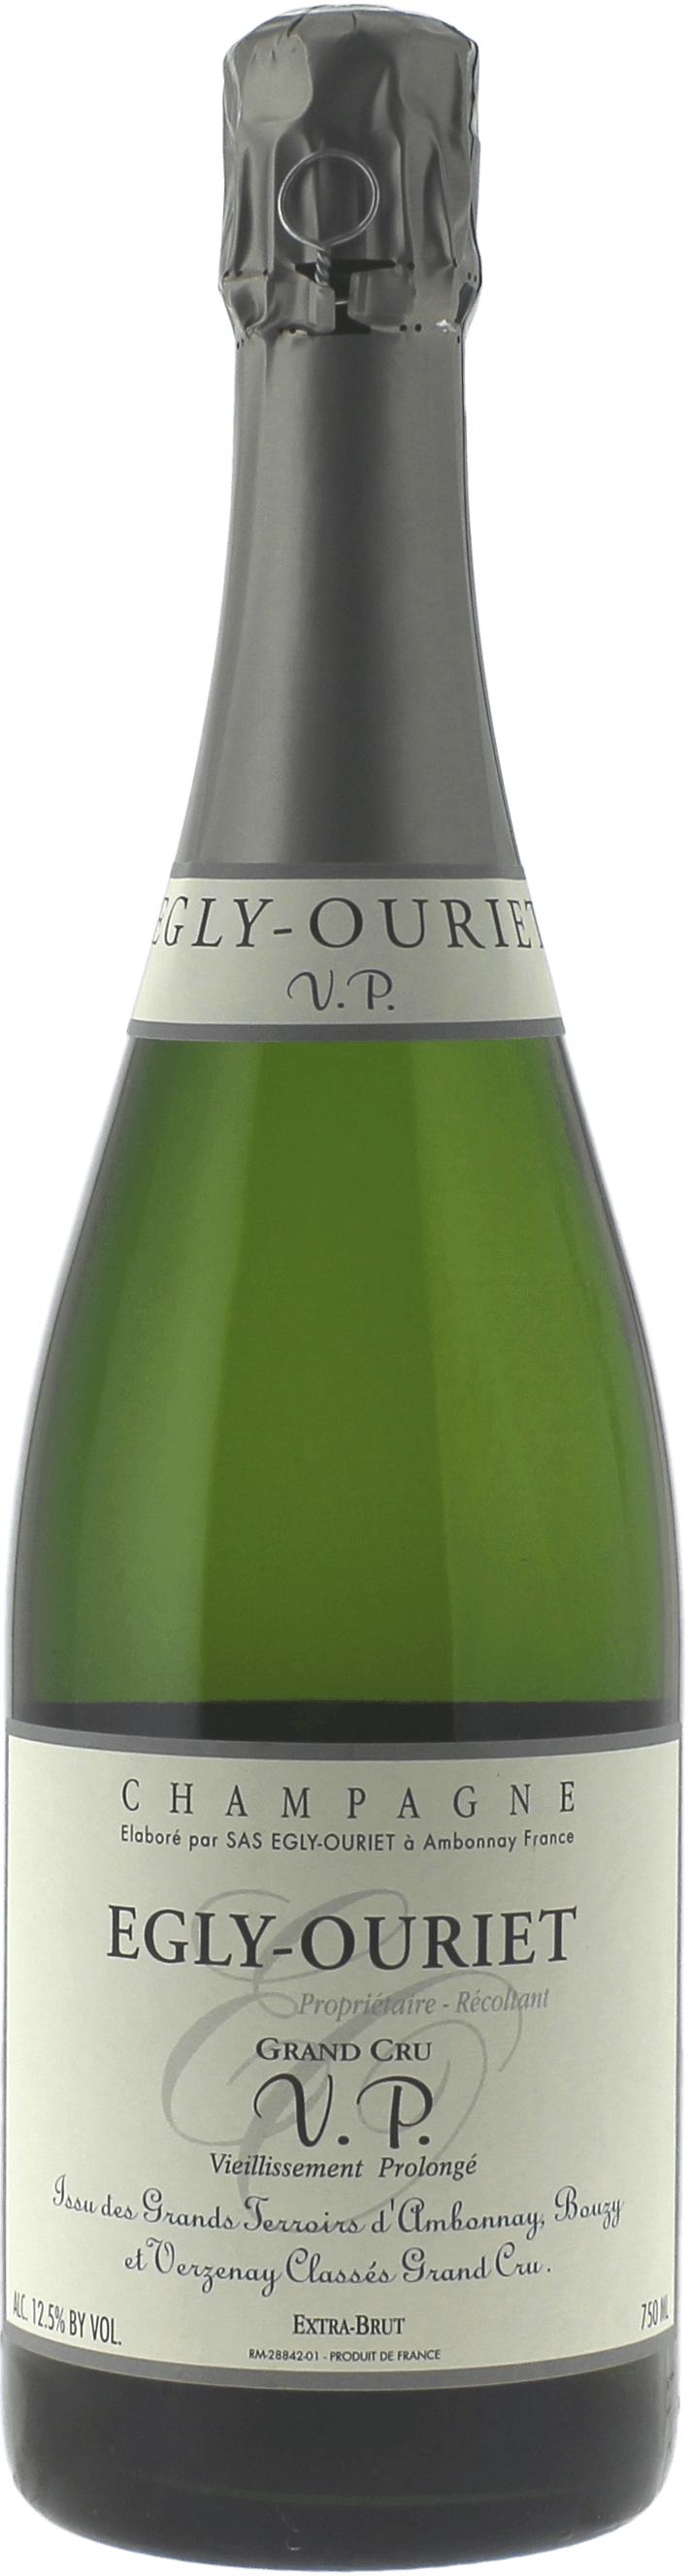 Egly-ouriet extra brut v.p. grand cru  Egly Ouriet, Champagne